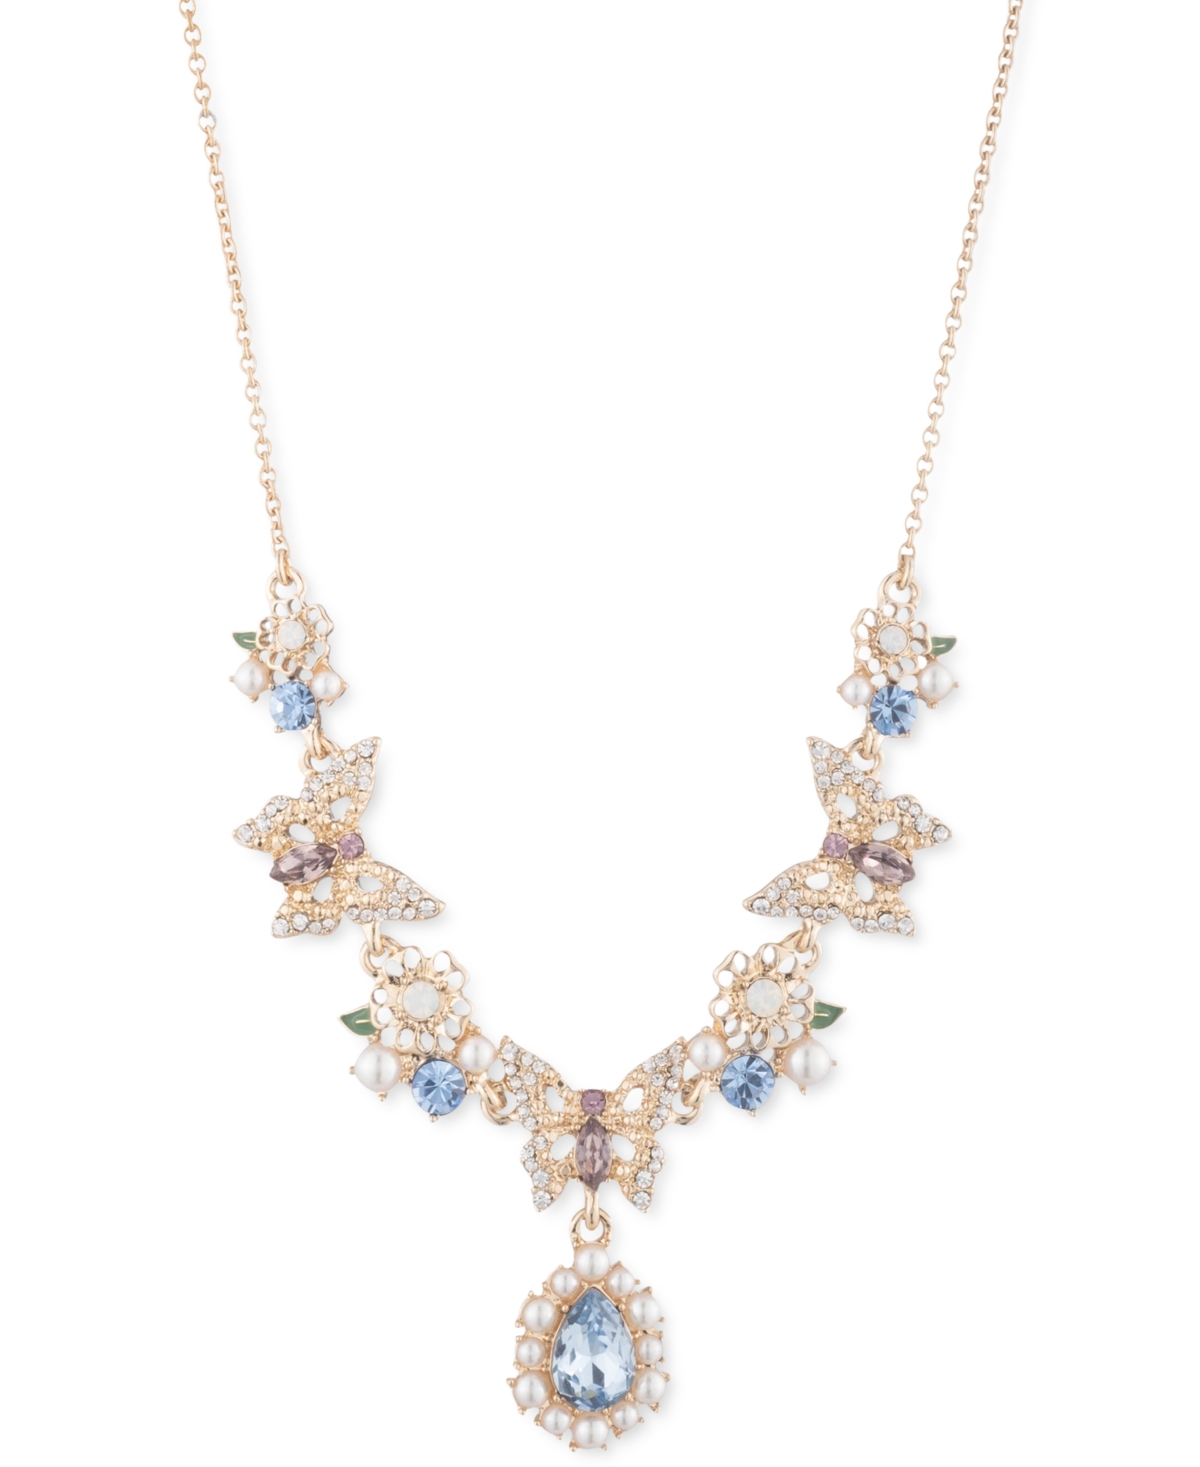 MARCHESA GOLD-TONE COLOR CRYSTAL & IMITATION PEARL FILIGREE BUTTERFLY STATEMENT LARIAT NECKLACE, 16" + 3" EXT